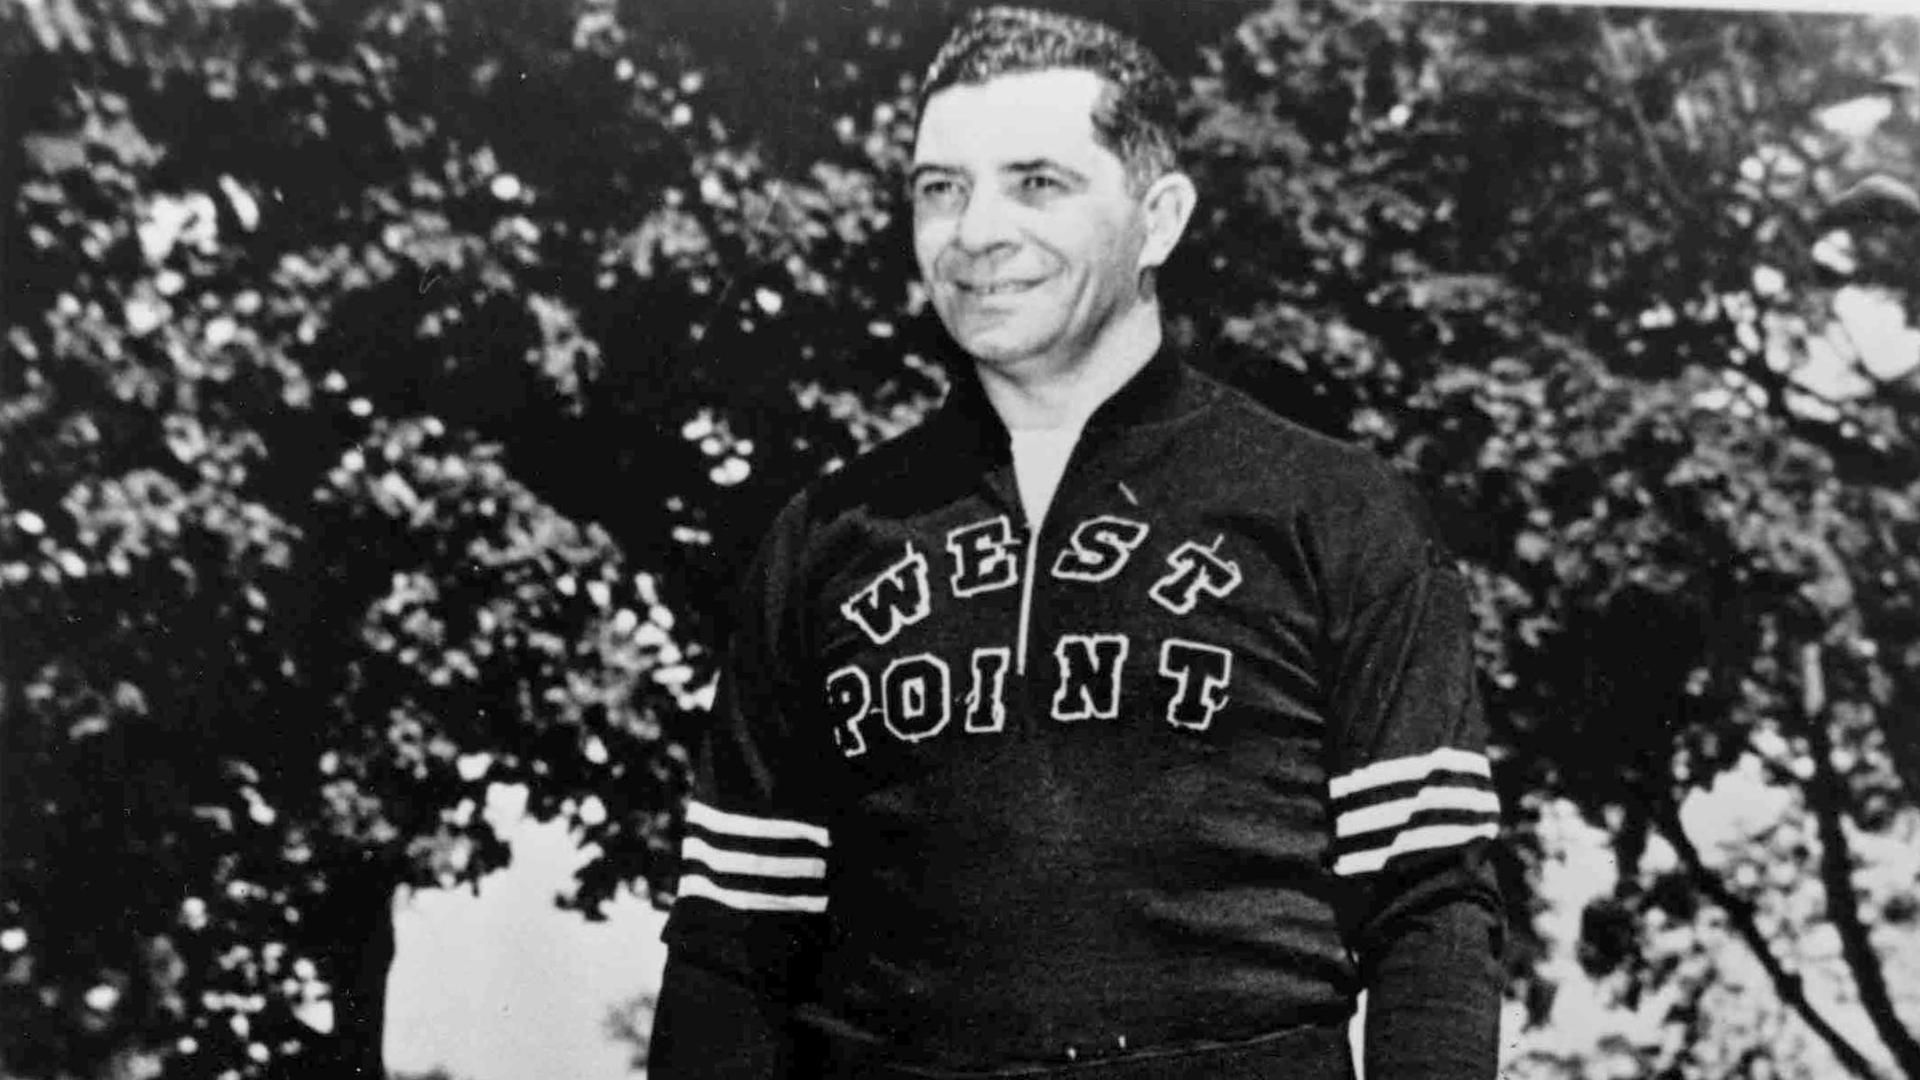 Lombardi Sweater Auctioned For $43K